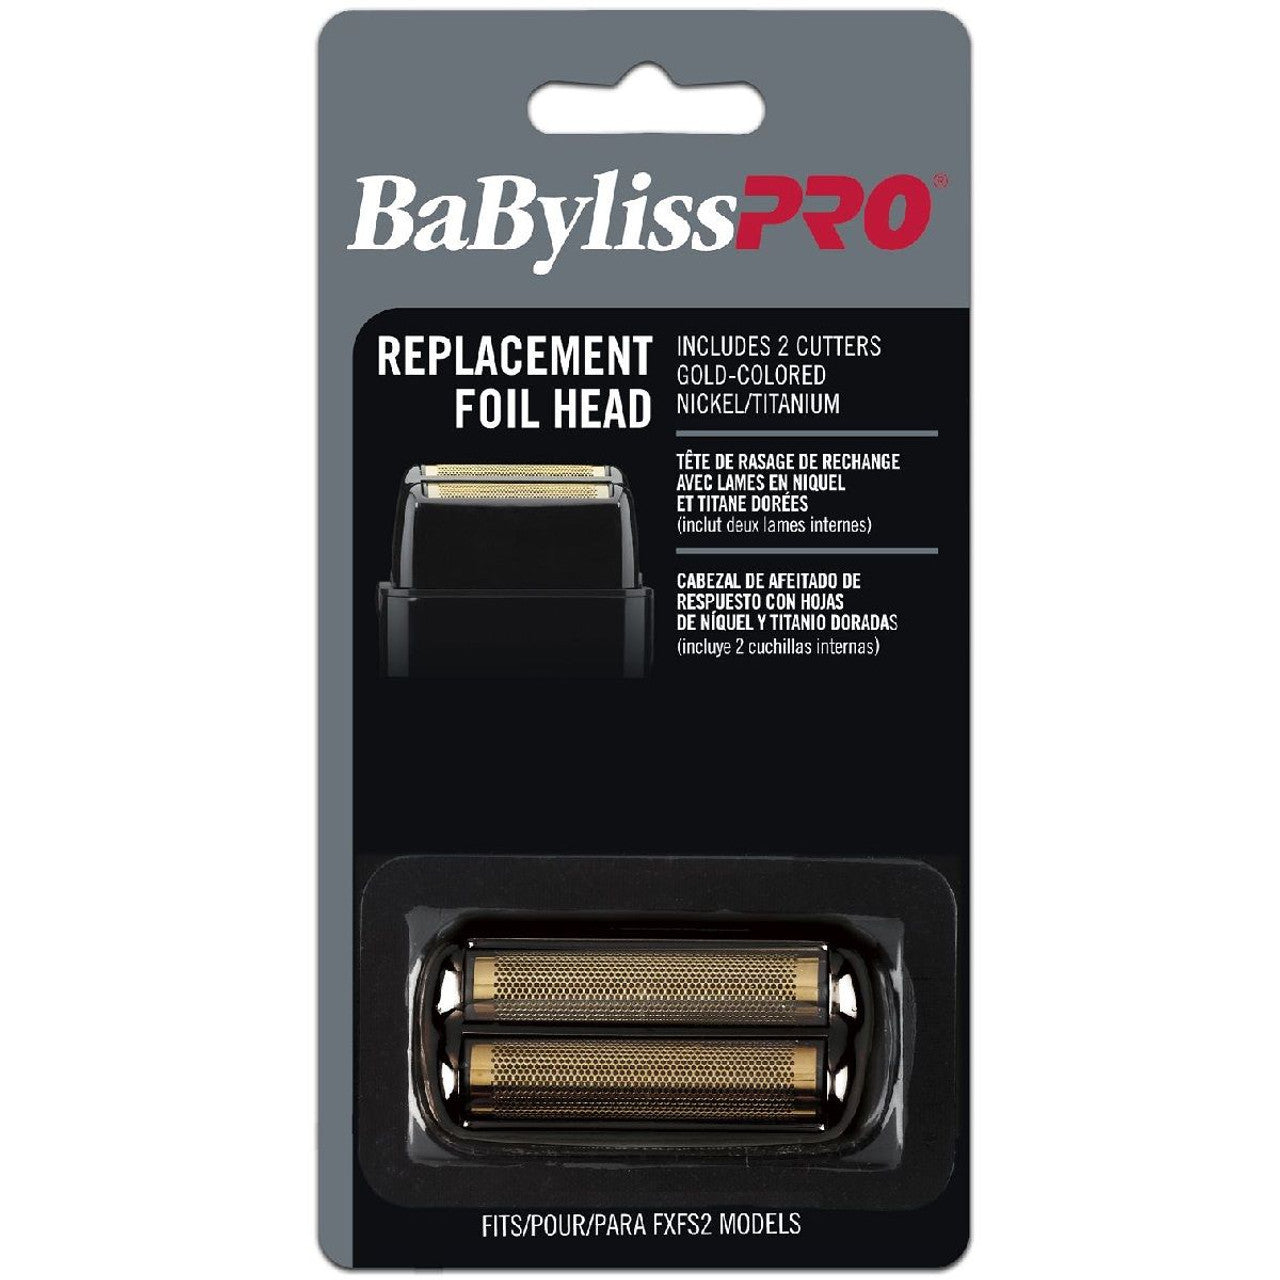 BABYLISS PRO REPLACEMENT FOIL & CUTTER - BLACK  #FXRF2B